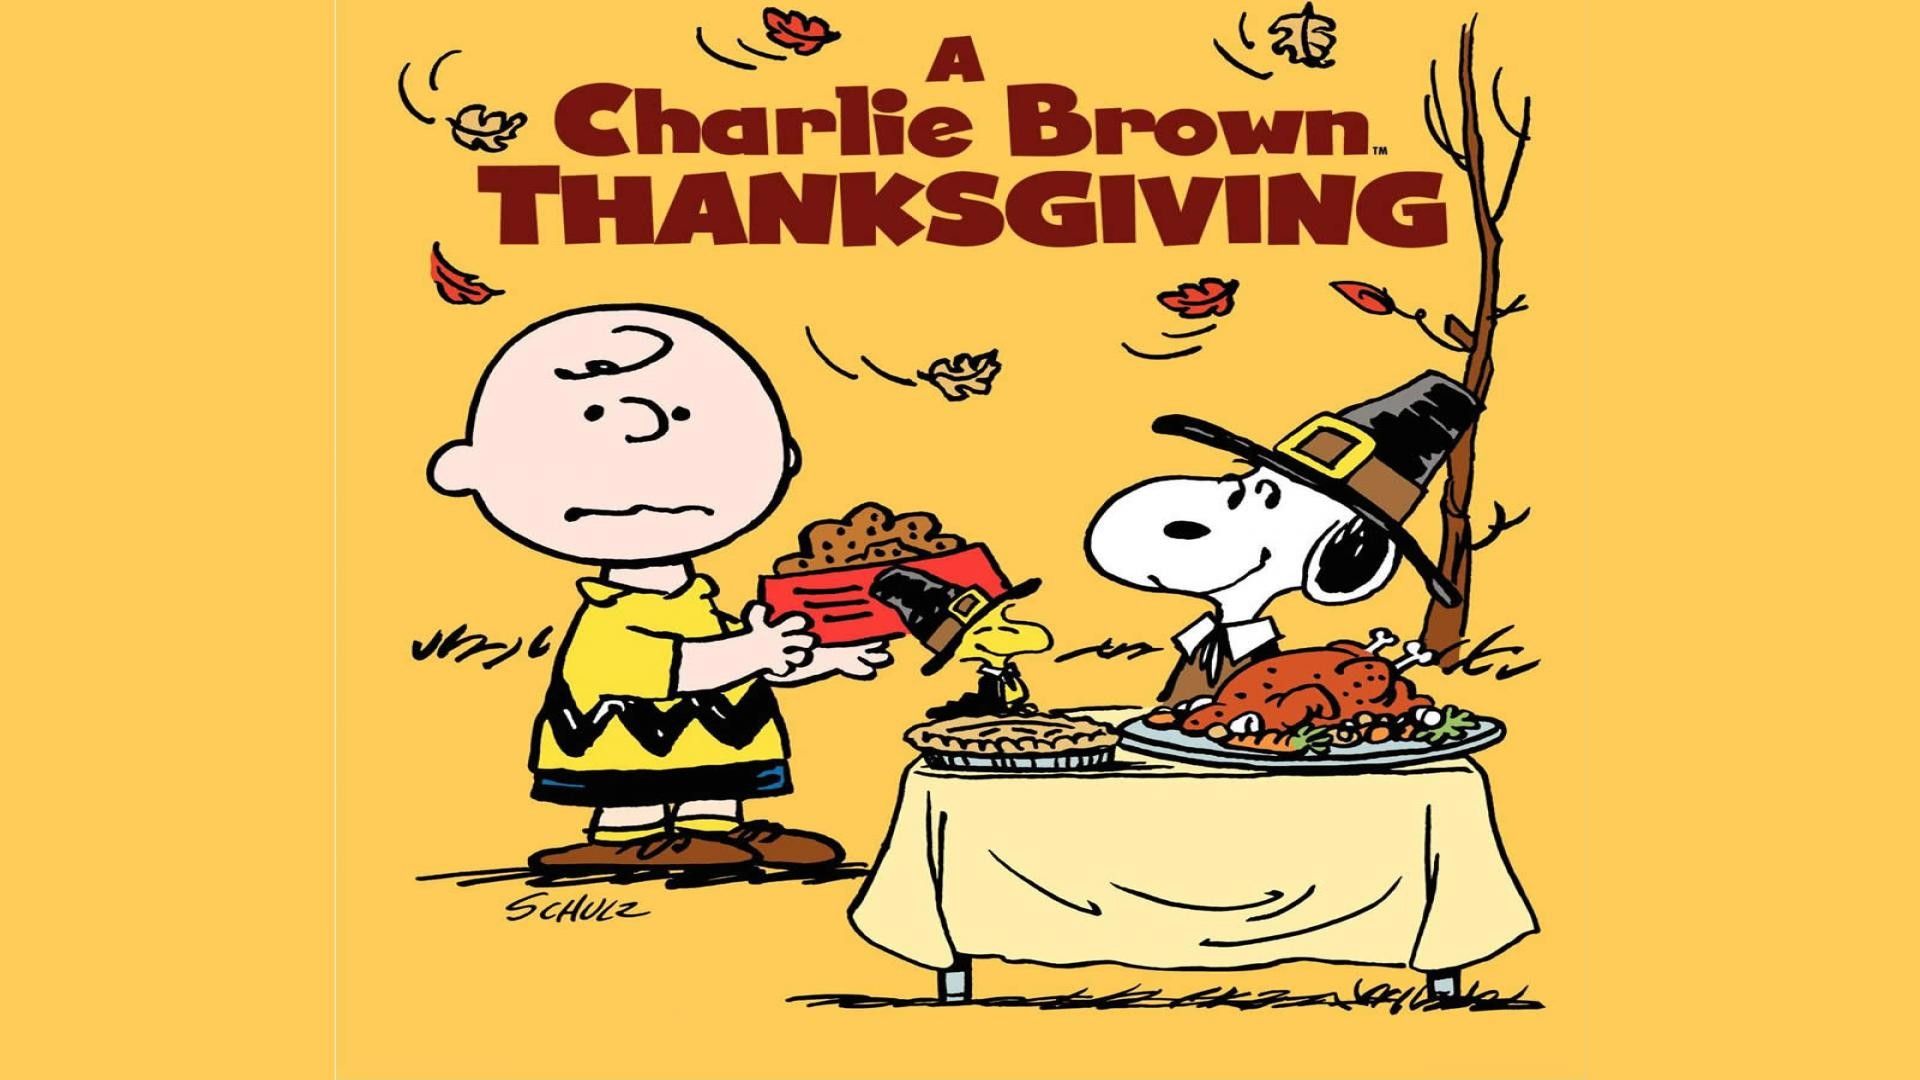 A charlie brown thanksgiving - Charlie Brown